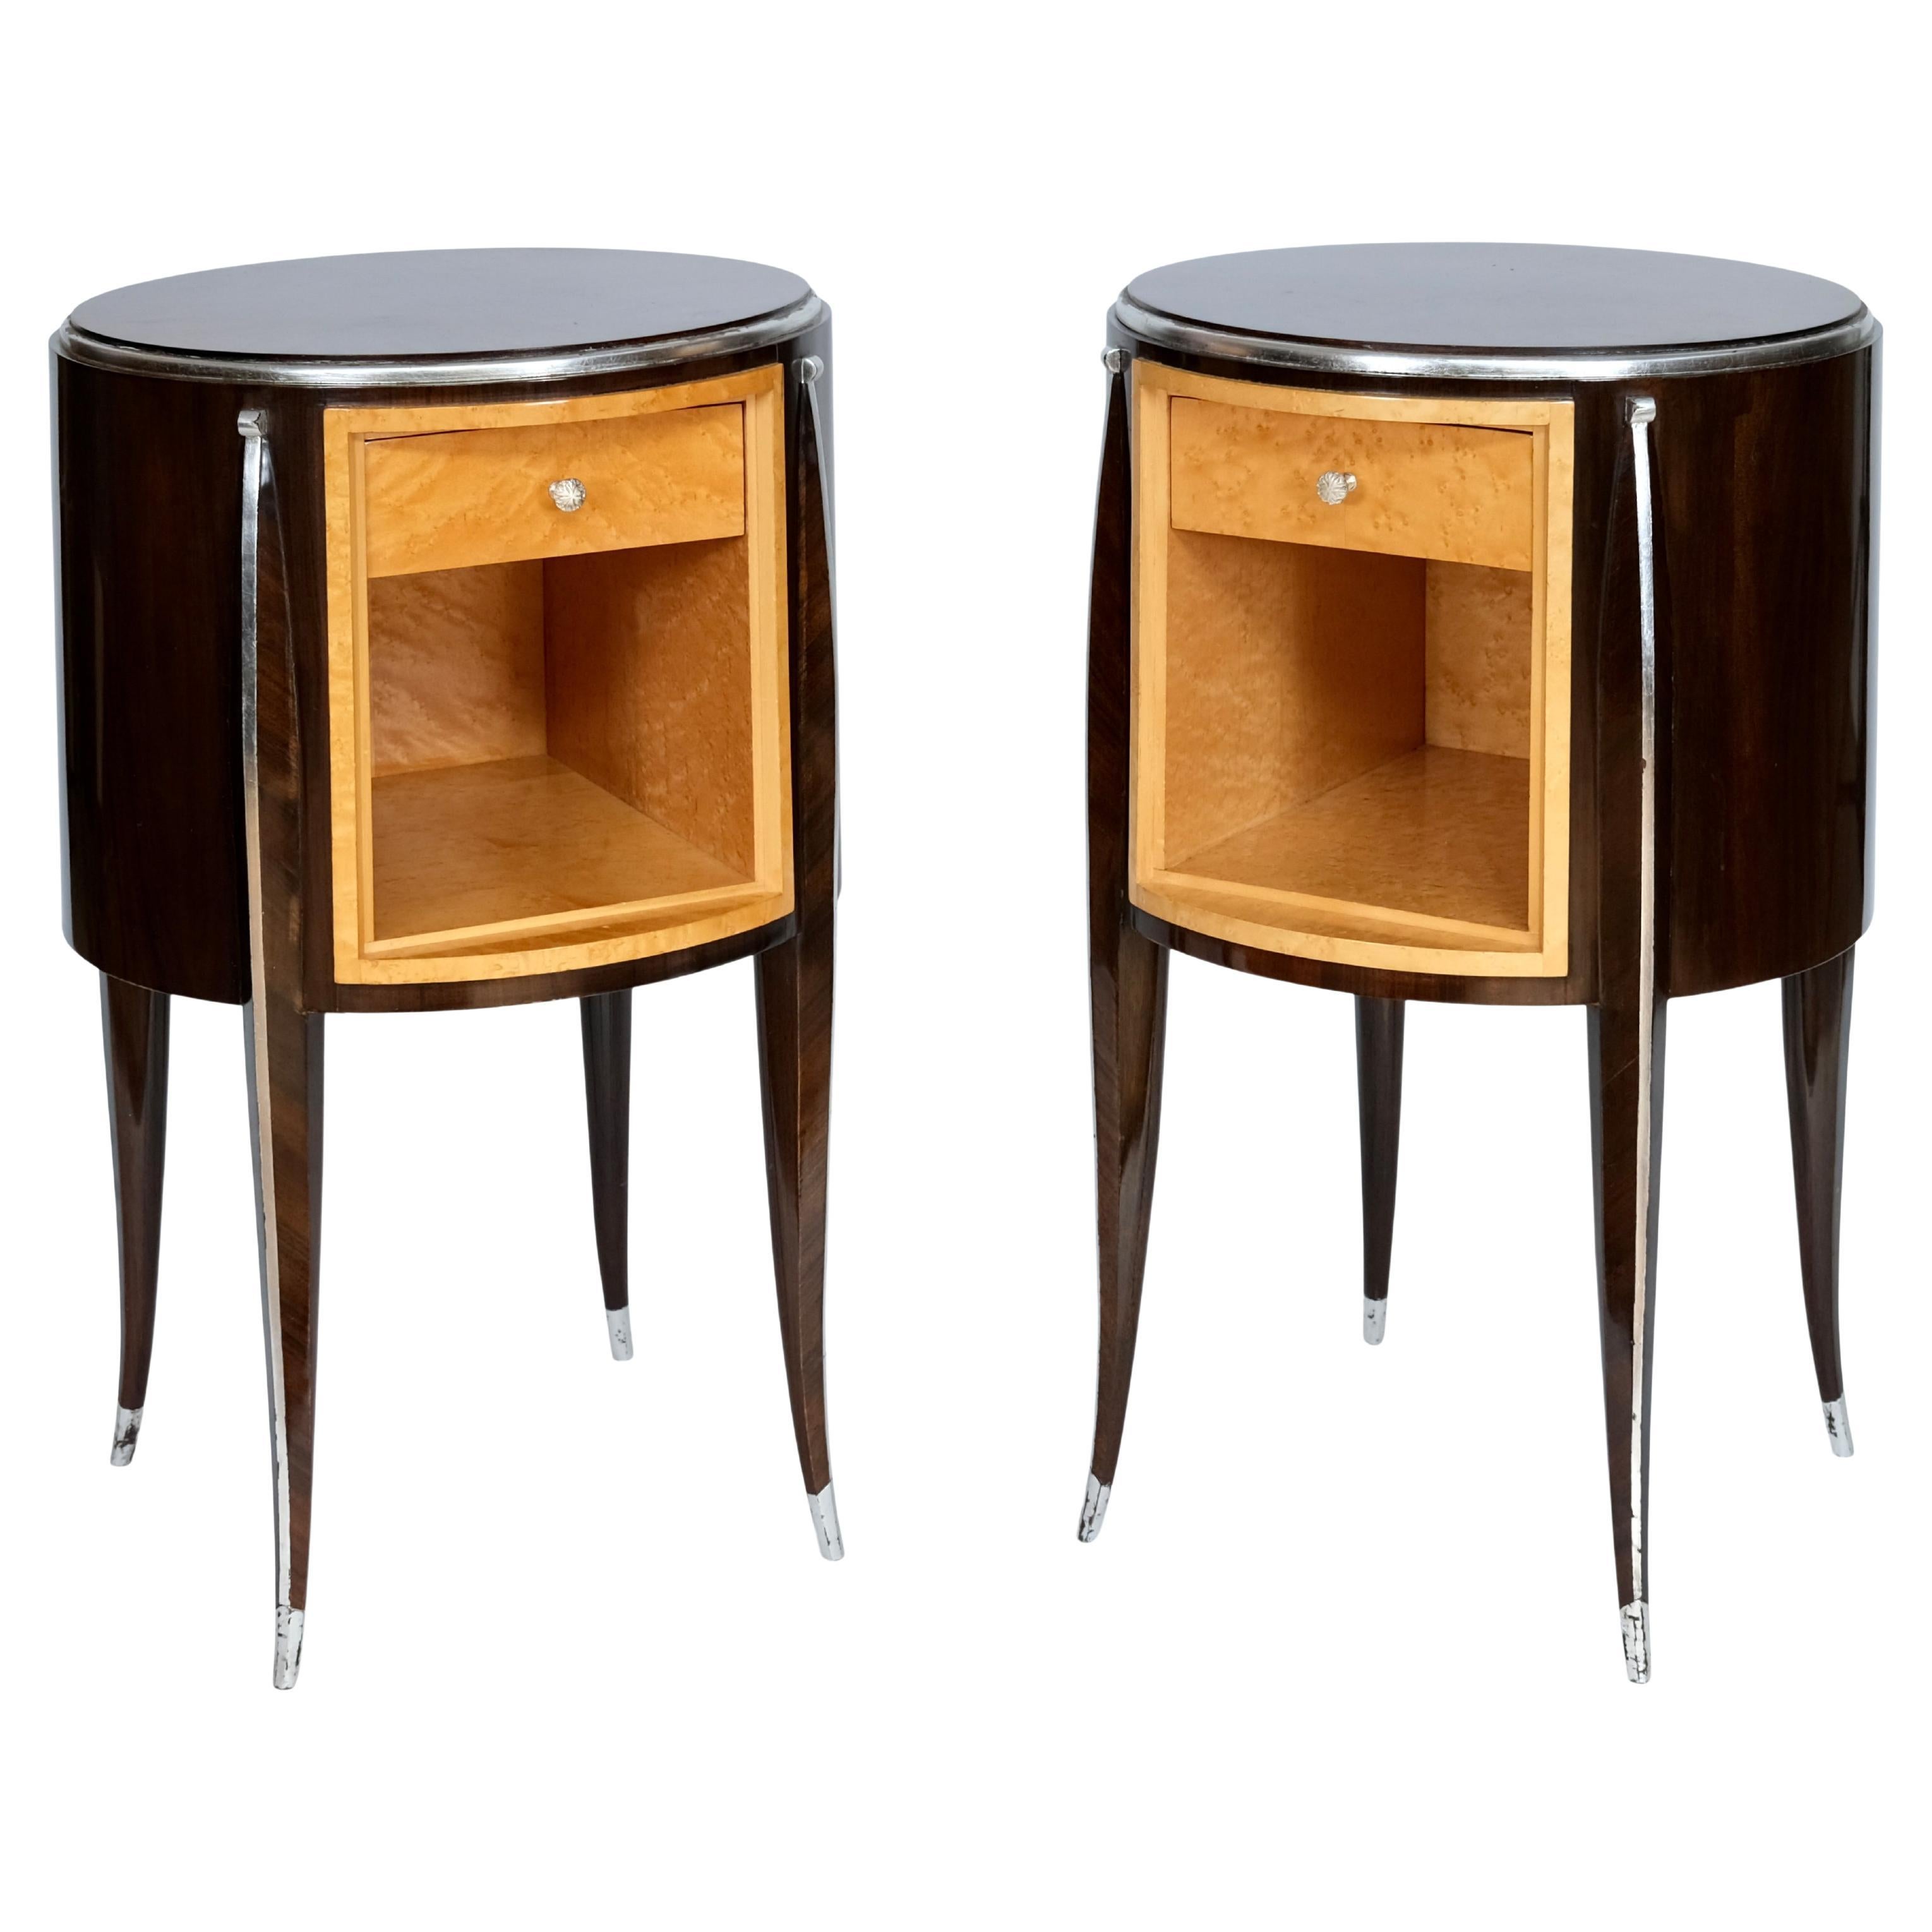 Set of 2 Round Art Deco Style Night Stands in Maple and Silver For Sale